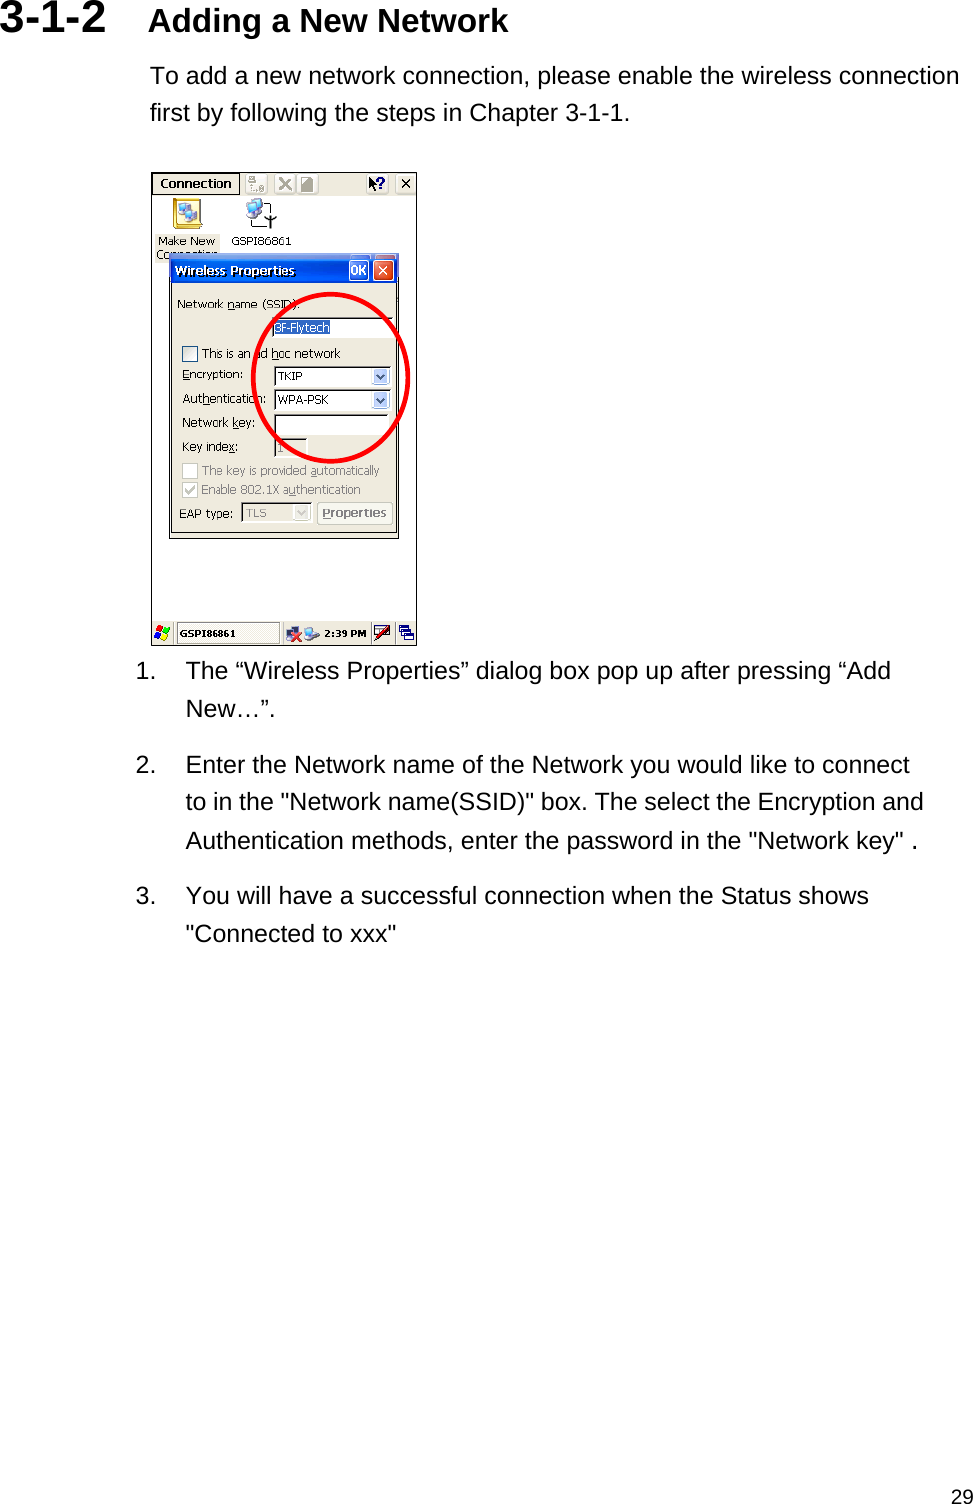   293-1-2  Adding a New Network To add a new network connection, please enable the wireless connection first by following the steps in Chapter 3-1-1.   1.  The “Wireless Properties” dialog box pop up after pressing “Add New…”.   2.  Enter the Network name of the Network you would like to connect to in the &quot;Network name(SSID)&quot; box. The select the Encryption and Authentication methods, enter the password in the &quot;Network key&quot; . 3.  You will have a successful connection when the Status shows &quot;Connected to xxx&quot;   